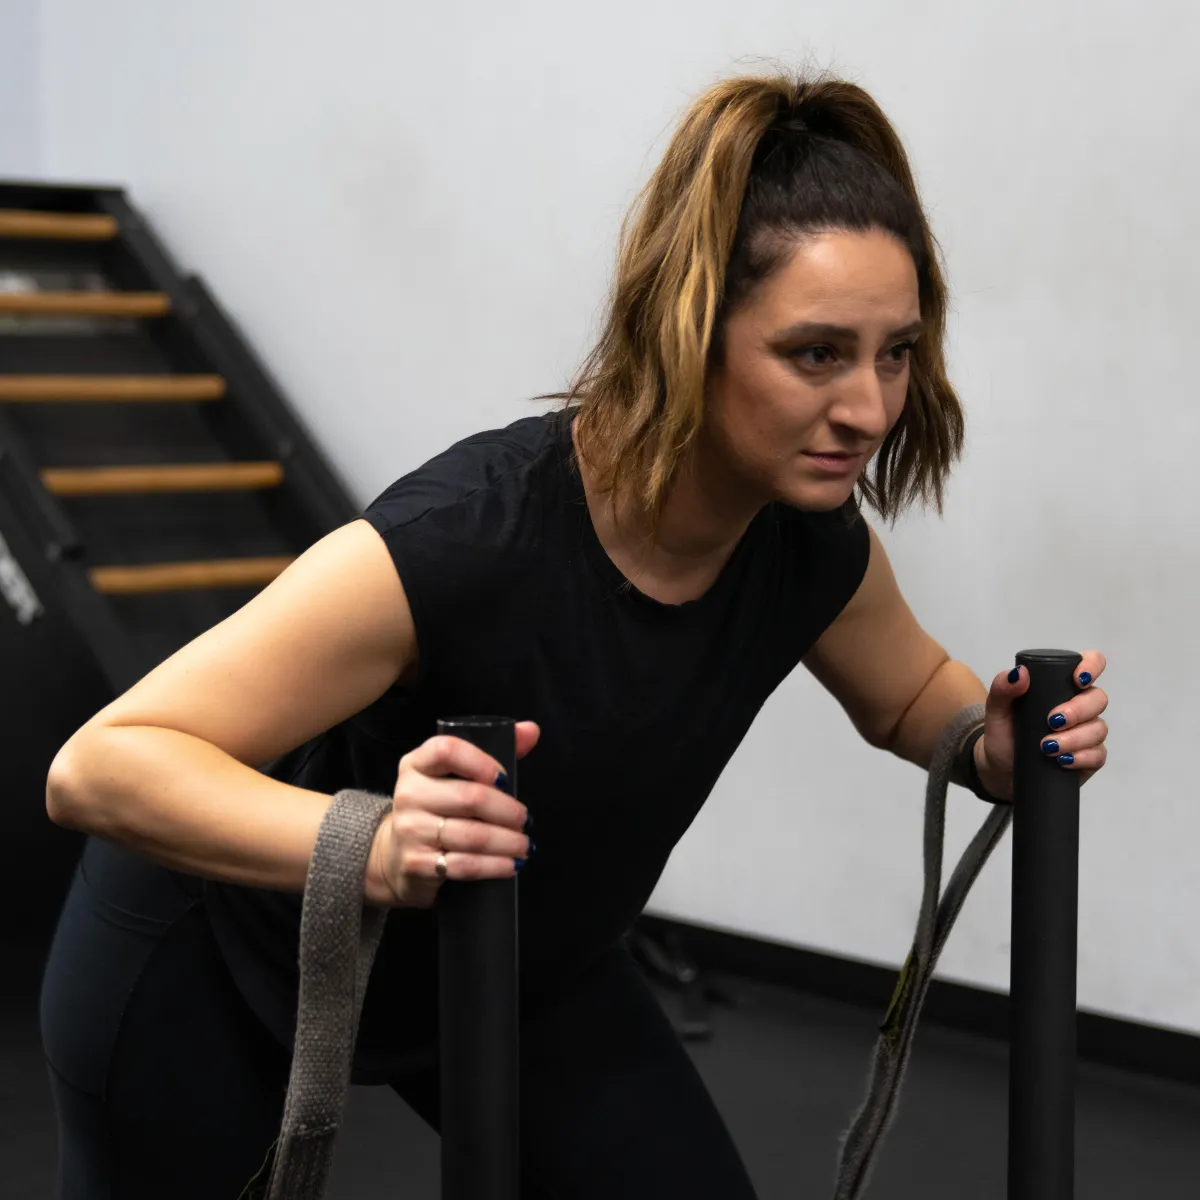 Female performing sled pushes and drags for exercise